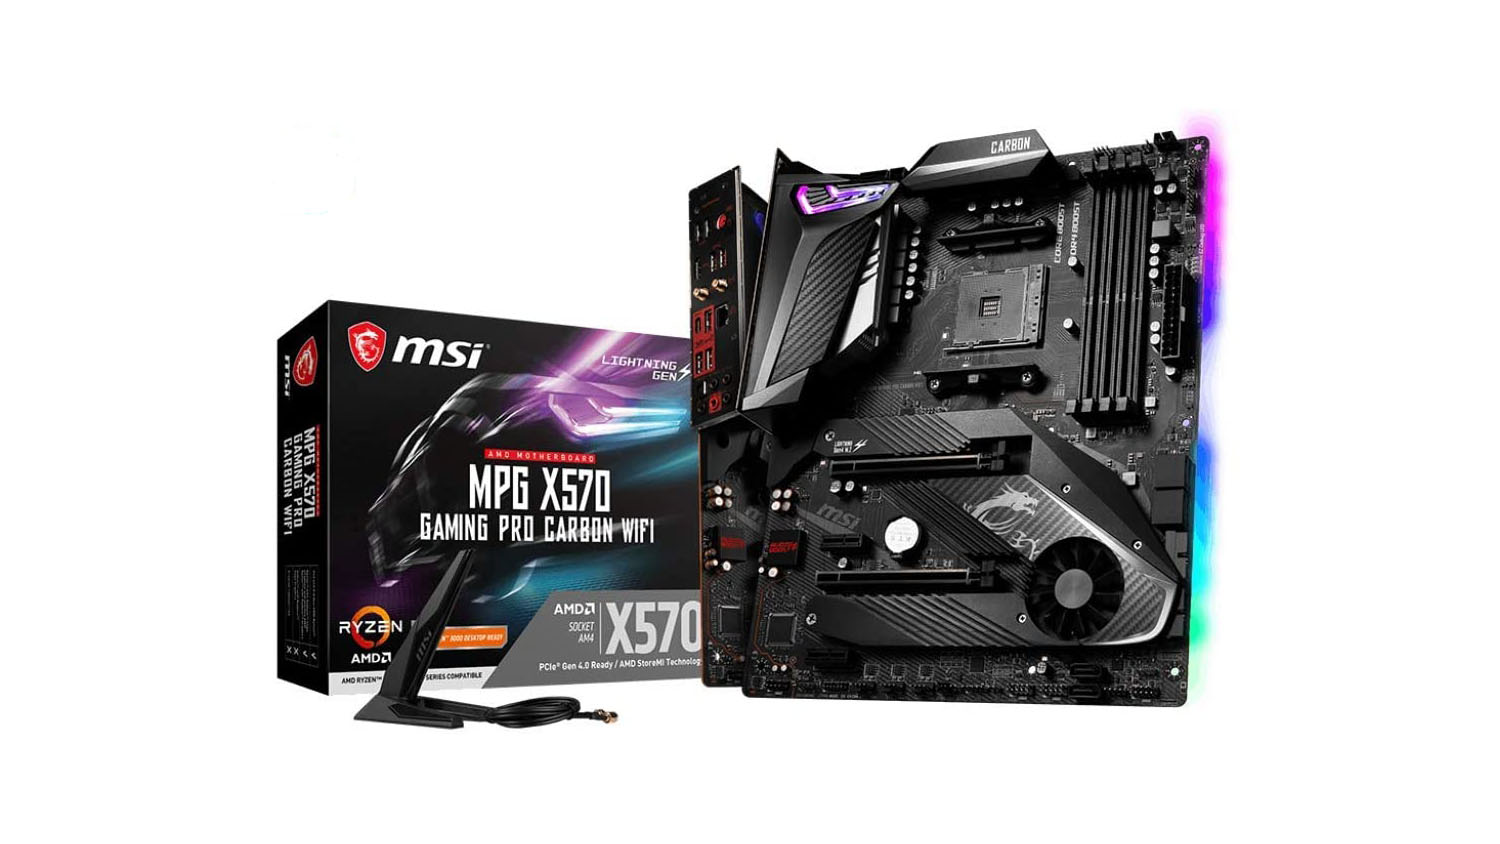 MSI MPG X570 GAMING PRO CARBON WIFI Gaming Motherboard